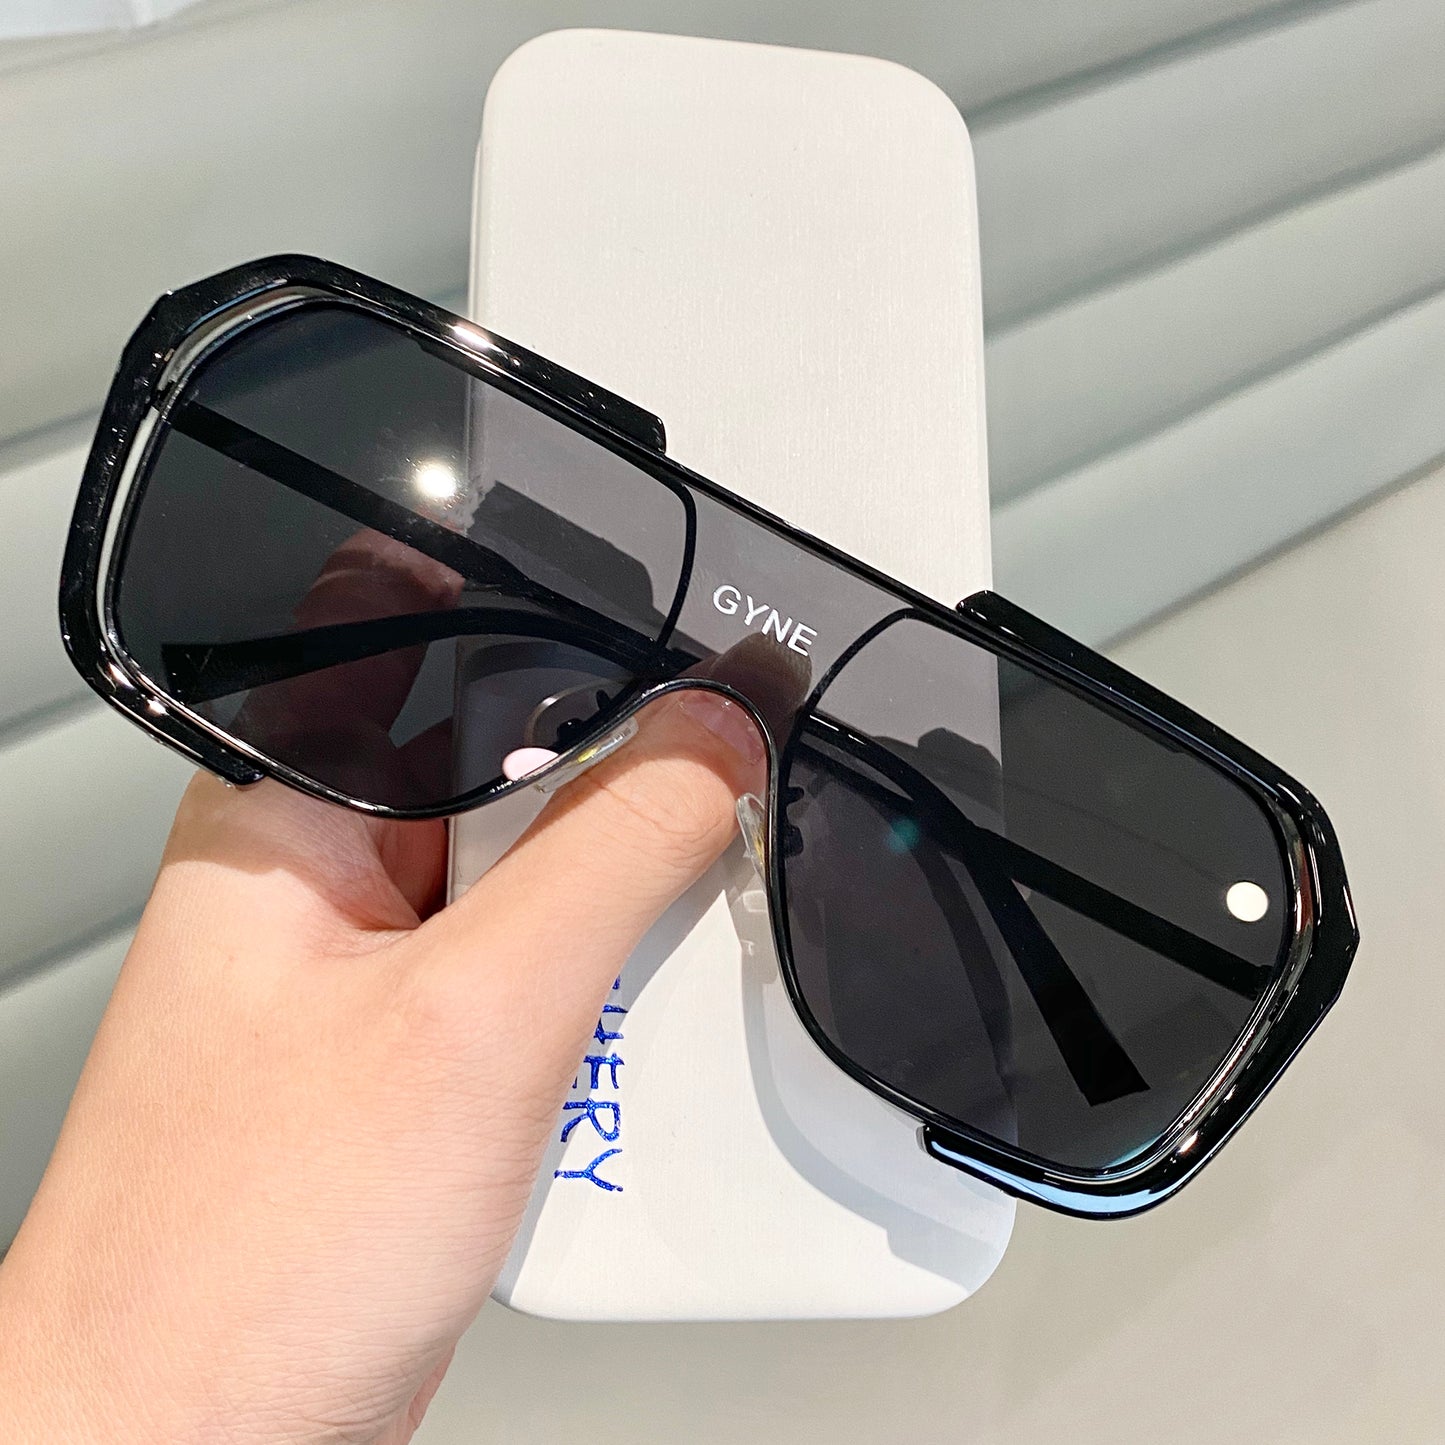 One-Piece Big Frame Square Sunglasses Female Yellow Sunglasses For Men Driving Uv Protection